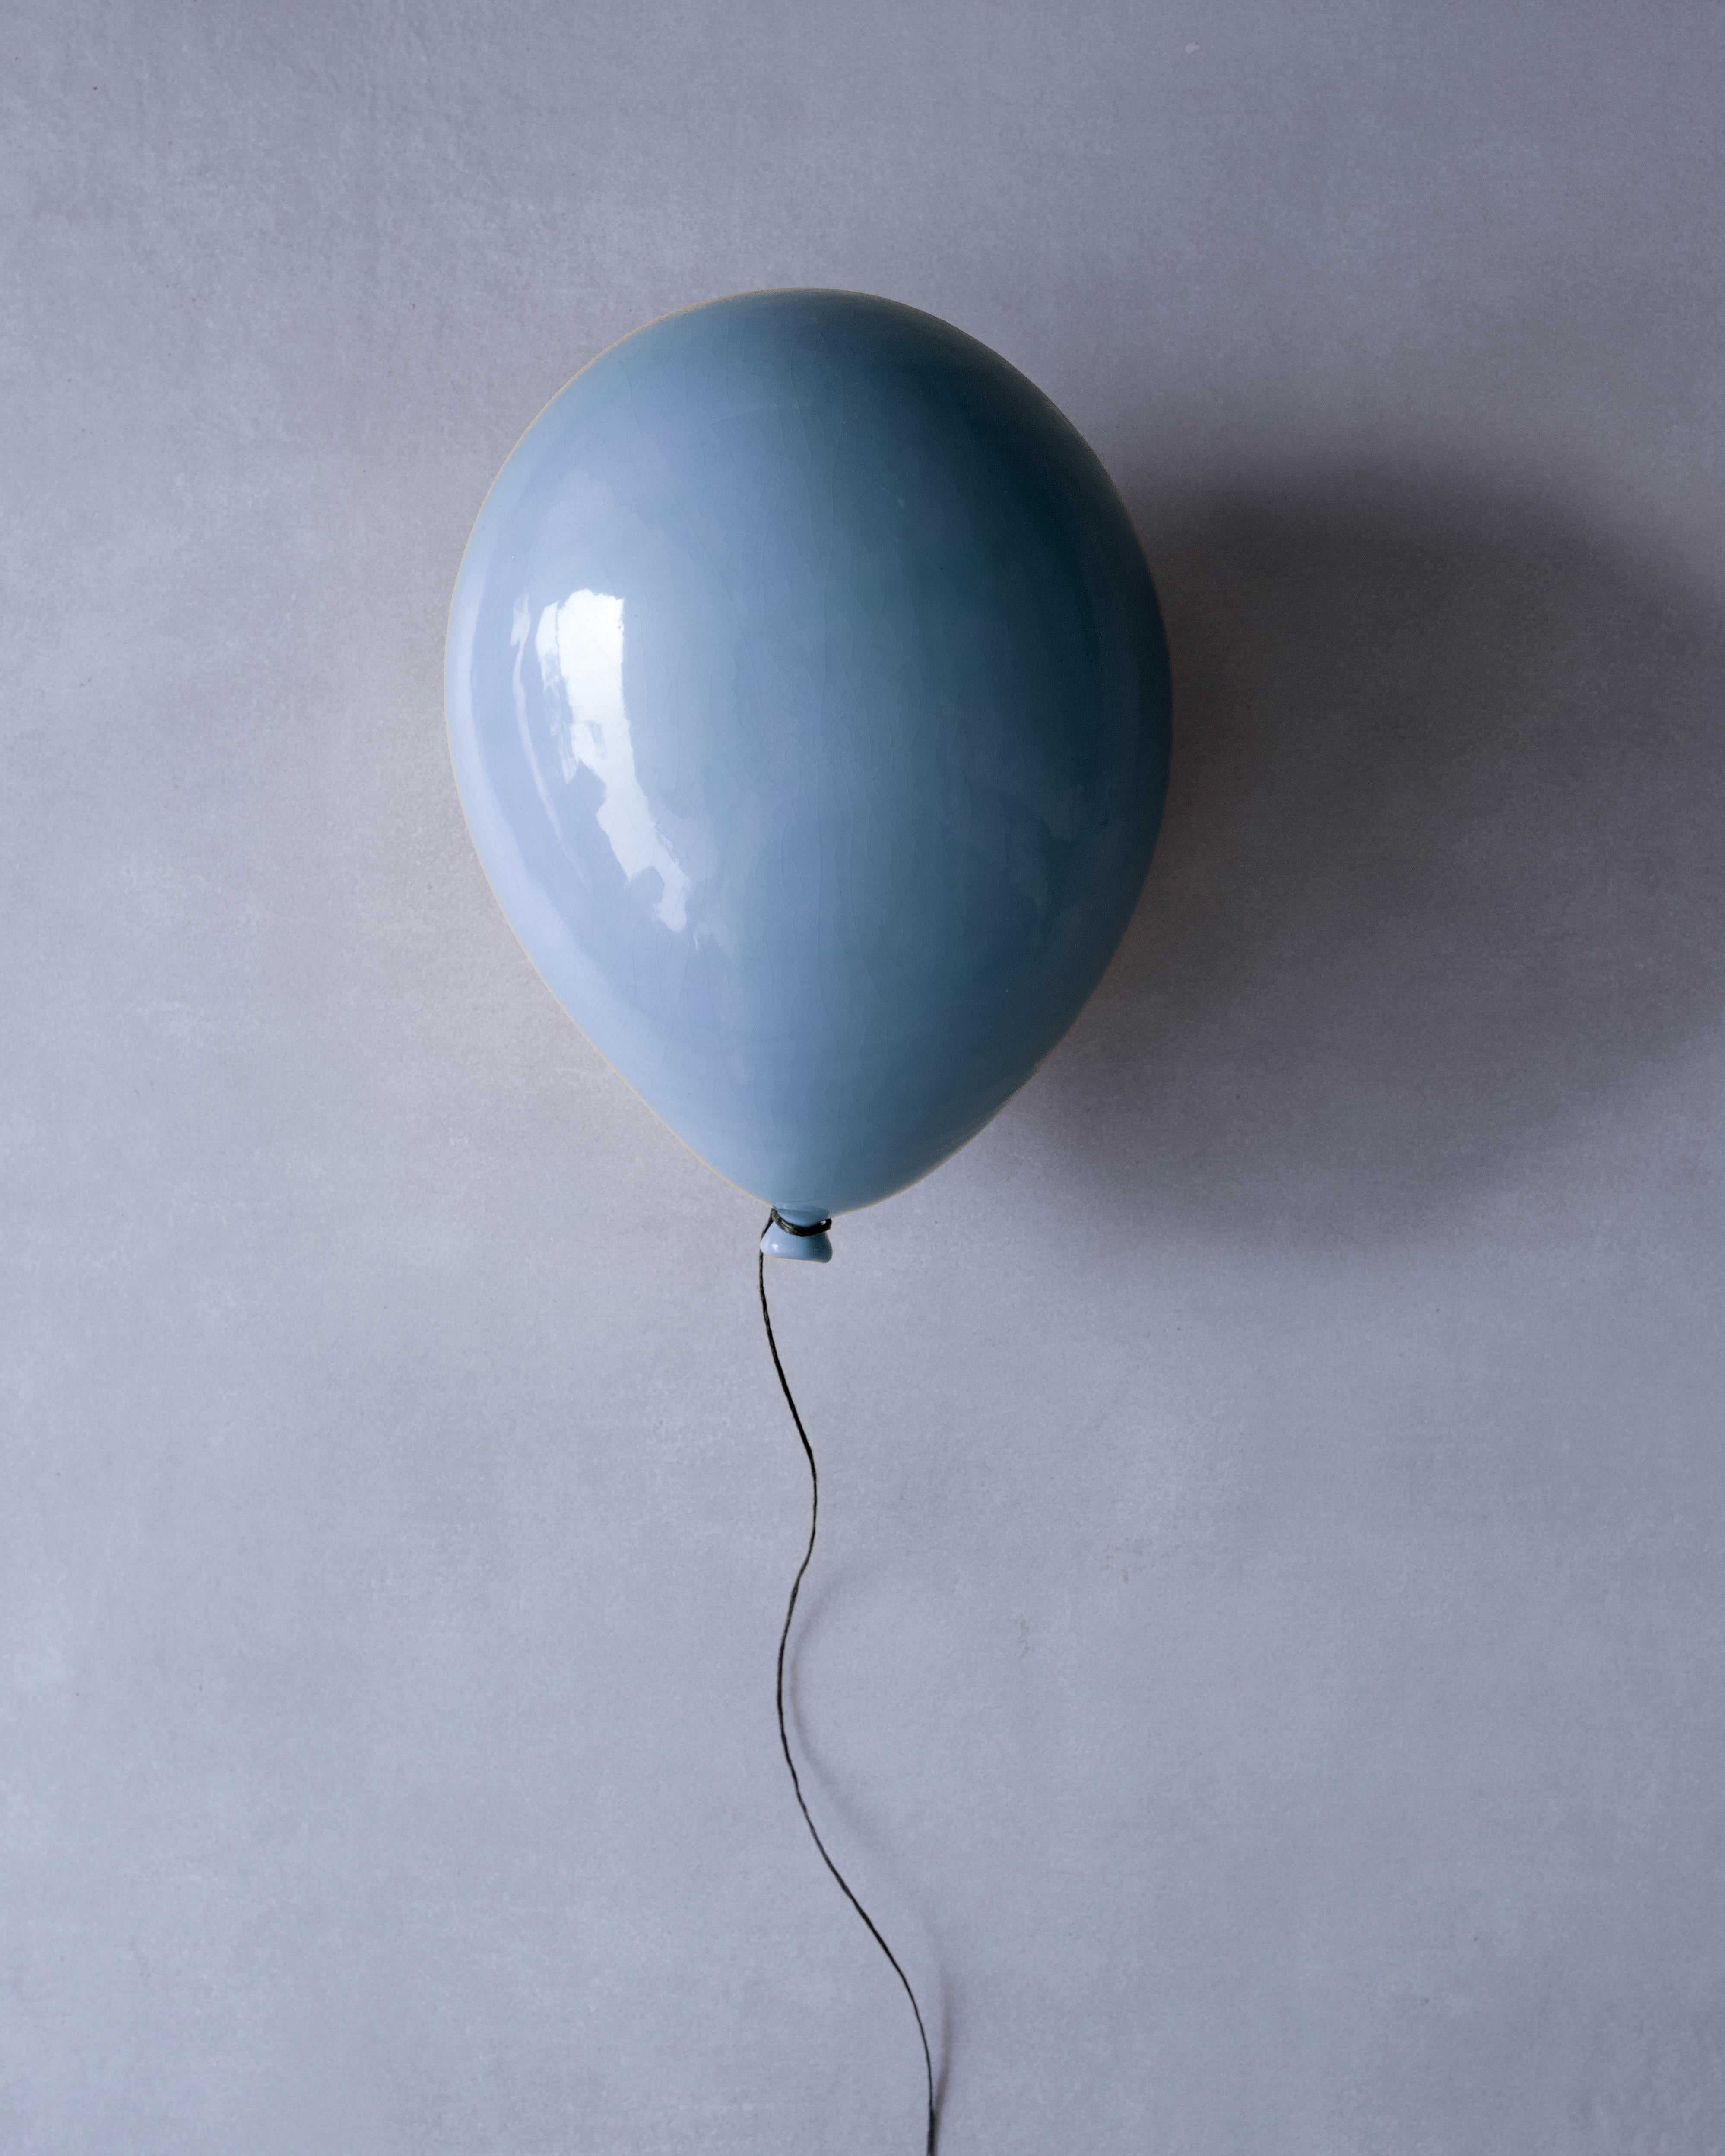 Reli Smith and Osnat Yaffe Zimmerman Abstract Sculpture - Blue Dawn glossy ceramic balloon sculpture handmade for wall, ceiling